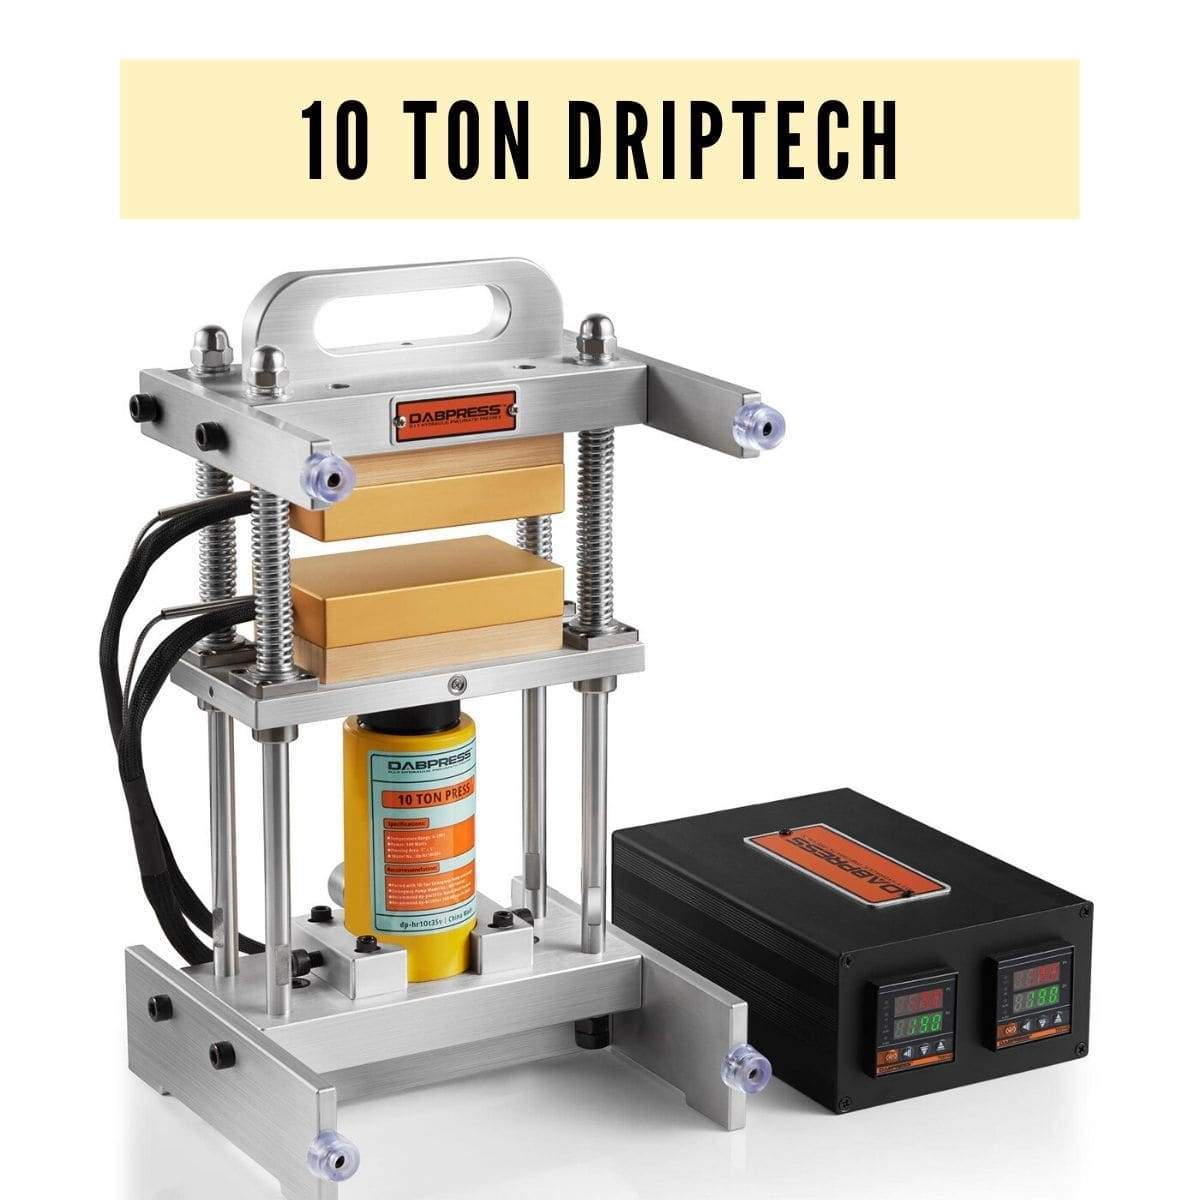 Dabpress Ton Driptech Rosin Press with Wholesale Price - GrowPackage.com